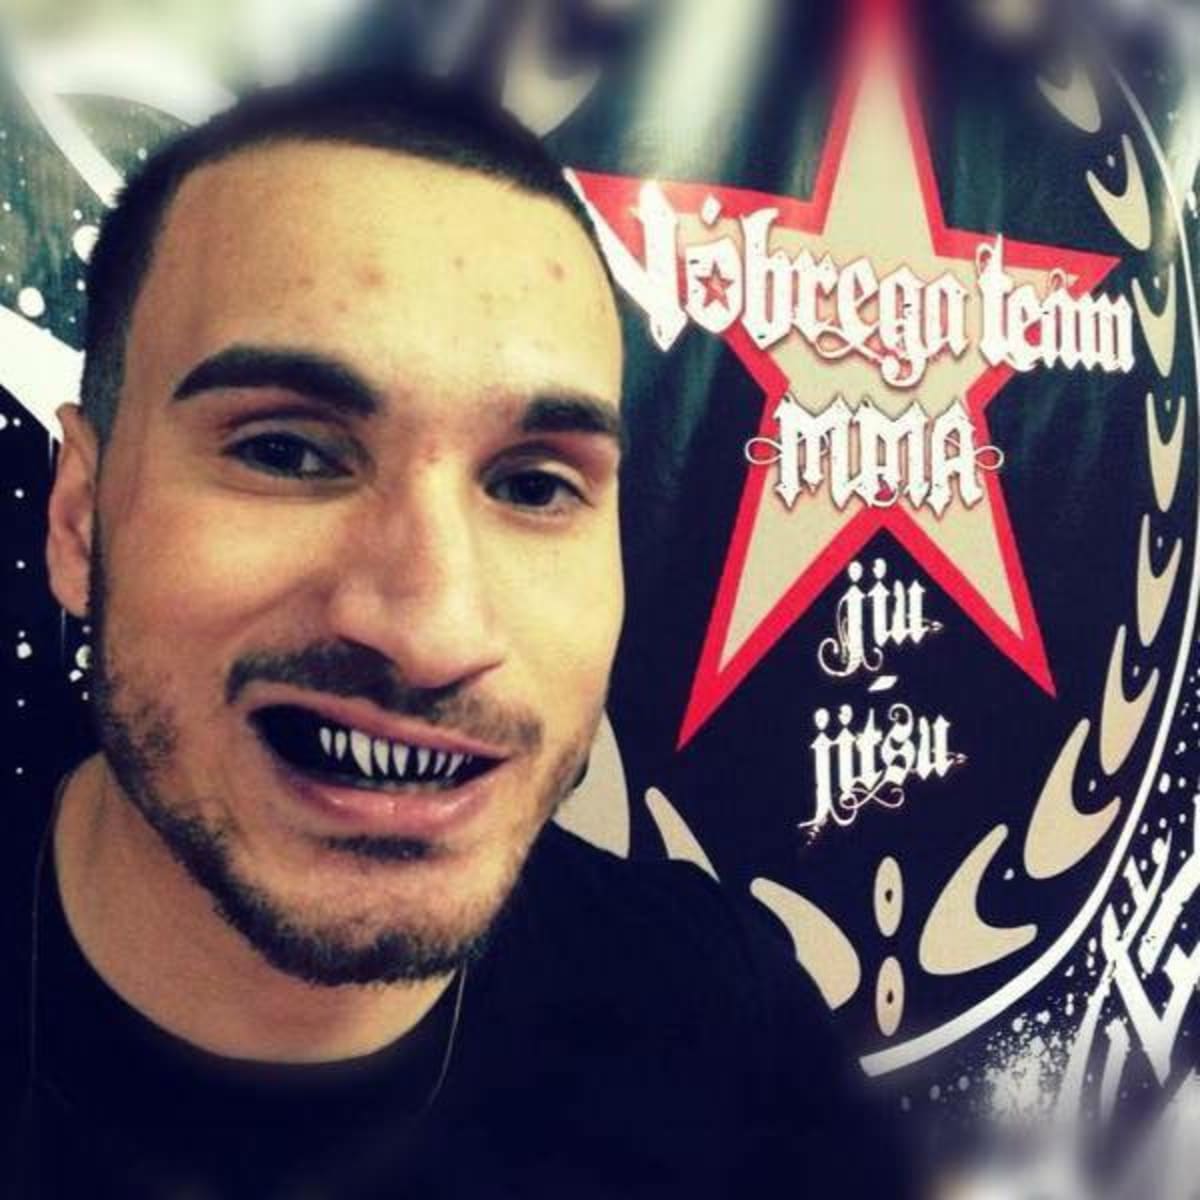 Mma Fighter Joao Carvalho Dies From Head Injuries After Fight Sports Illustrated